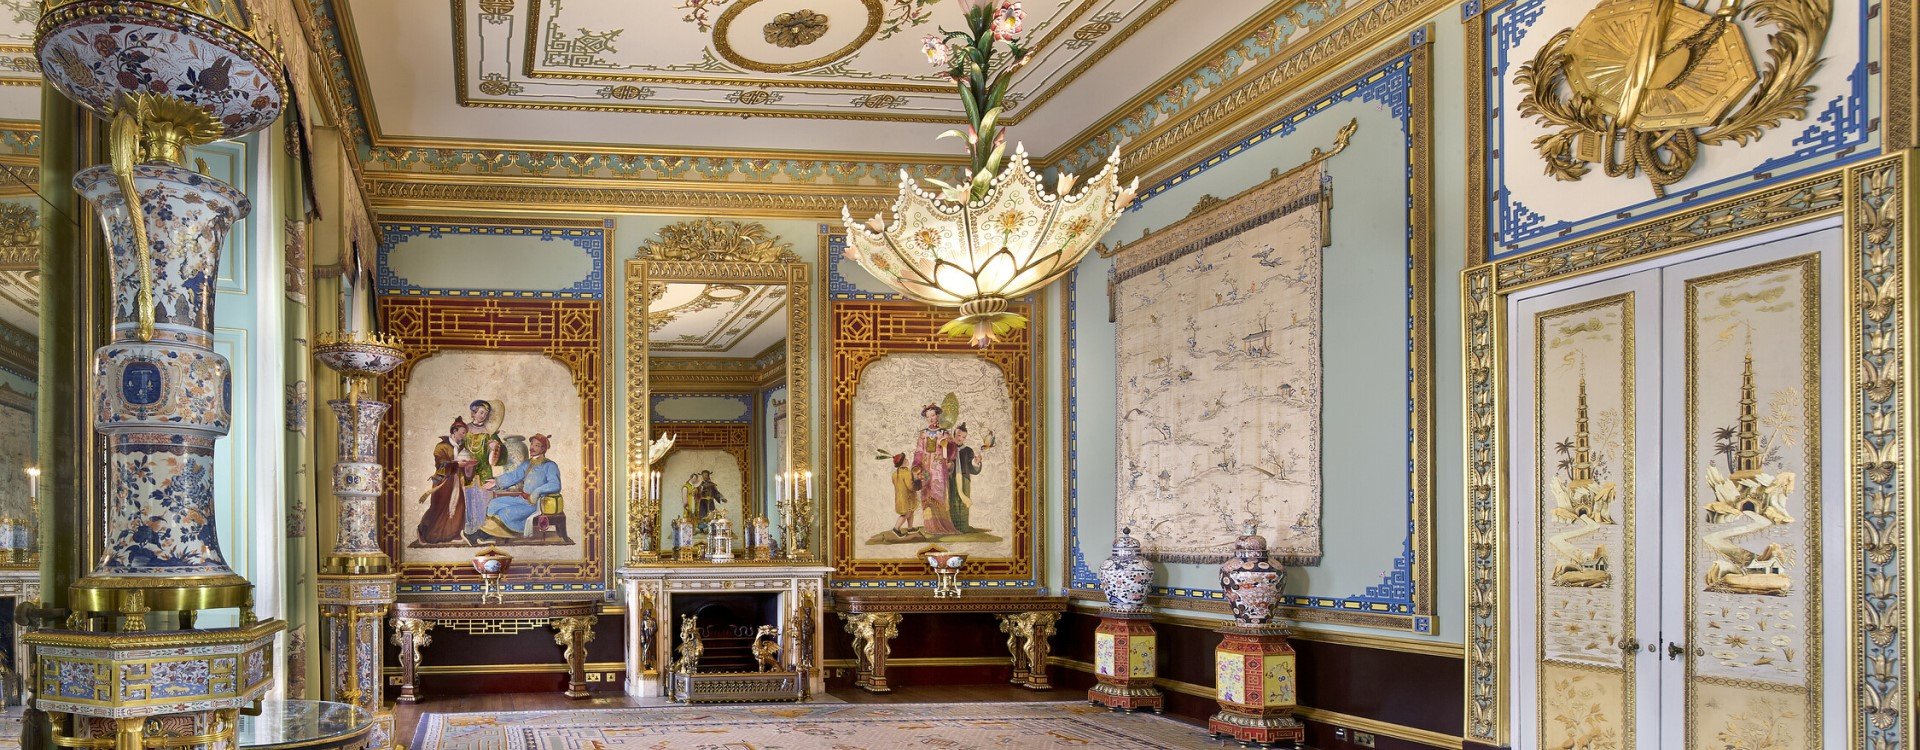 The Centre Room, Buckingham Palace decorated with Chinese-themed works of art